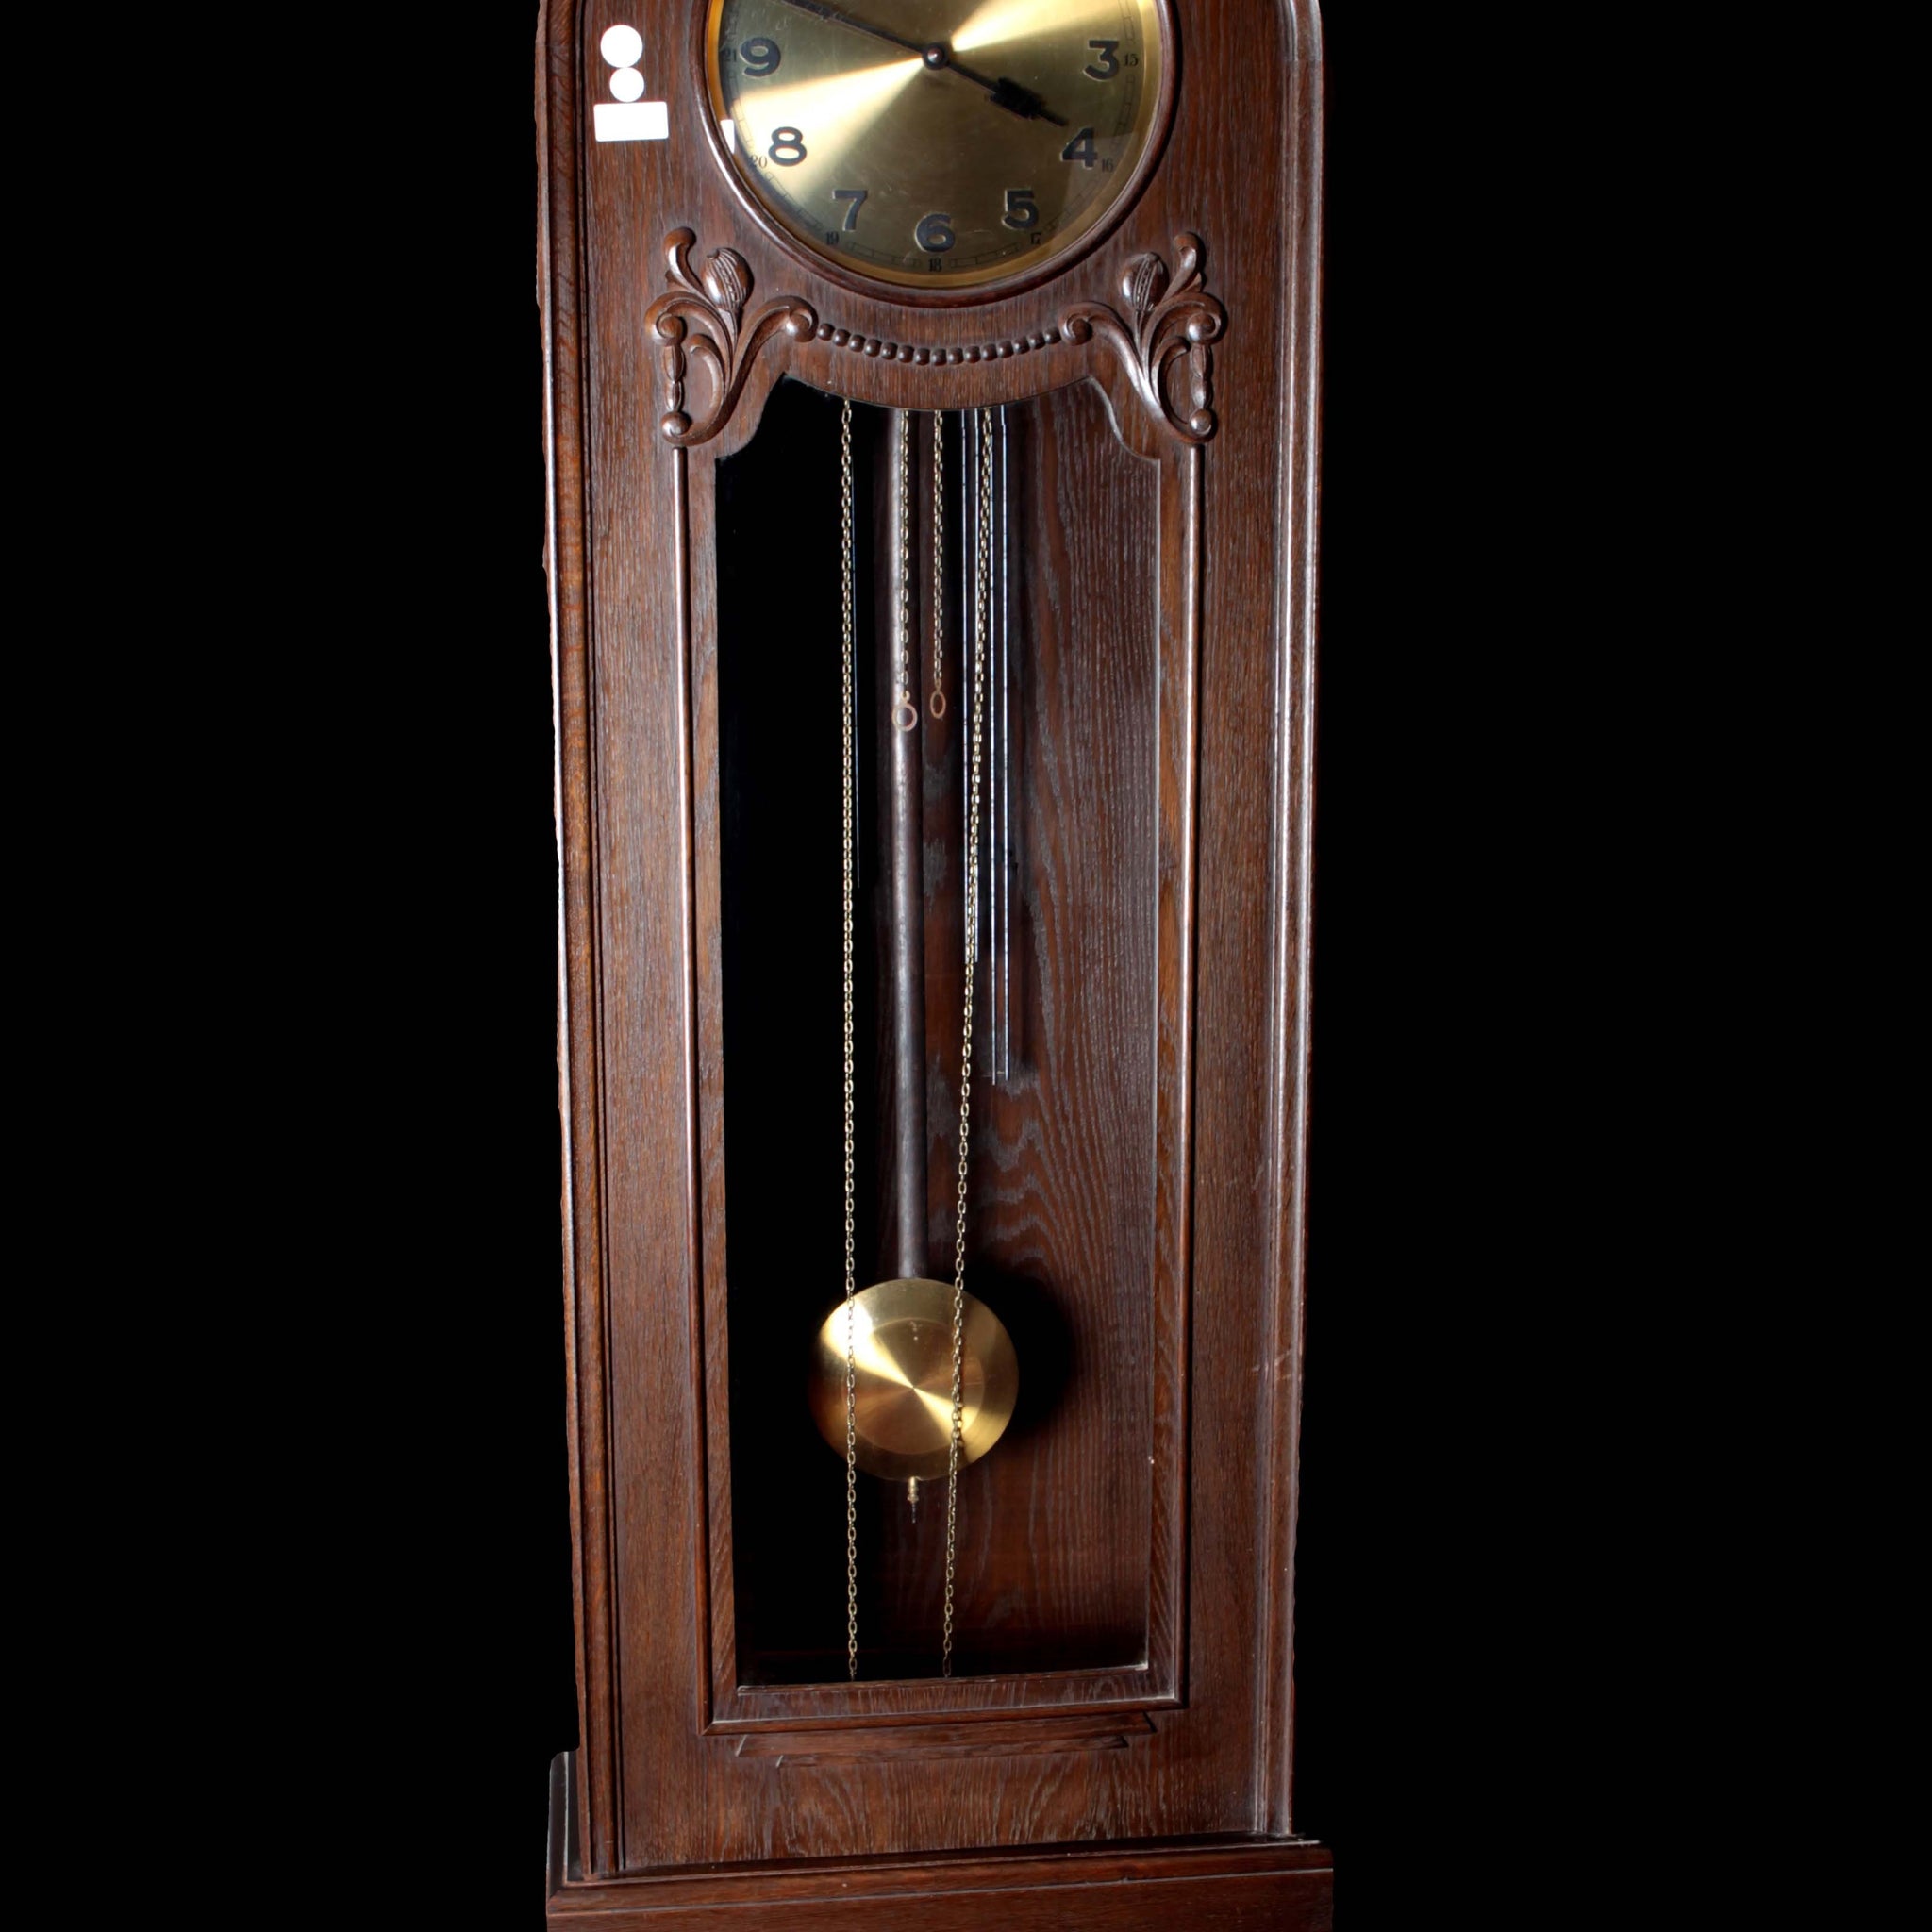 Art Deco style column clock in carved oak, from the early 1900s